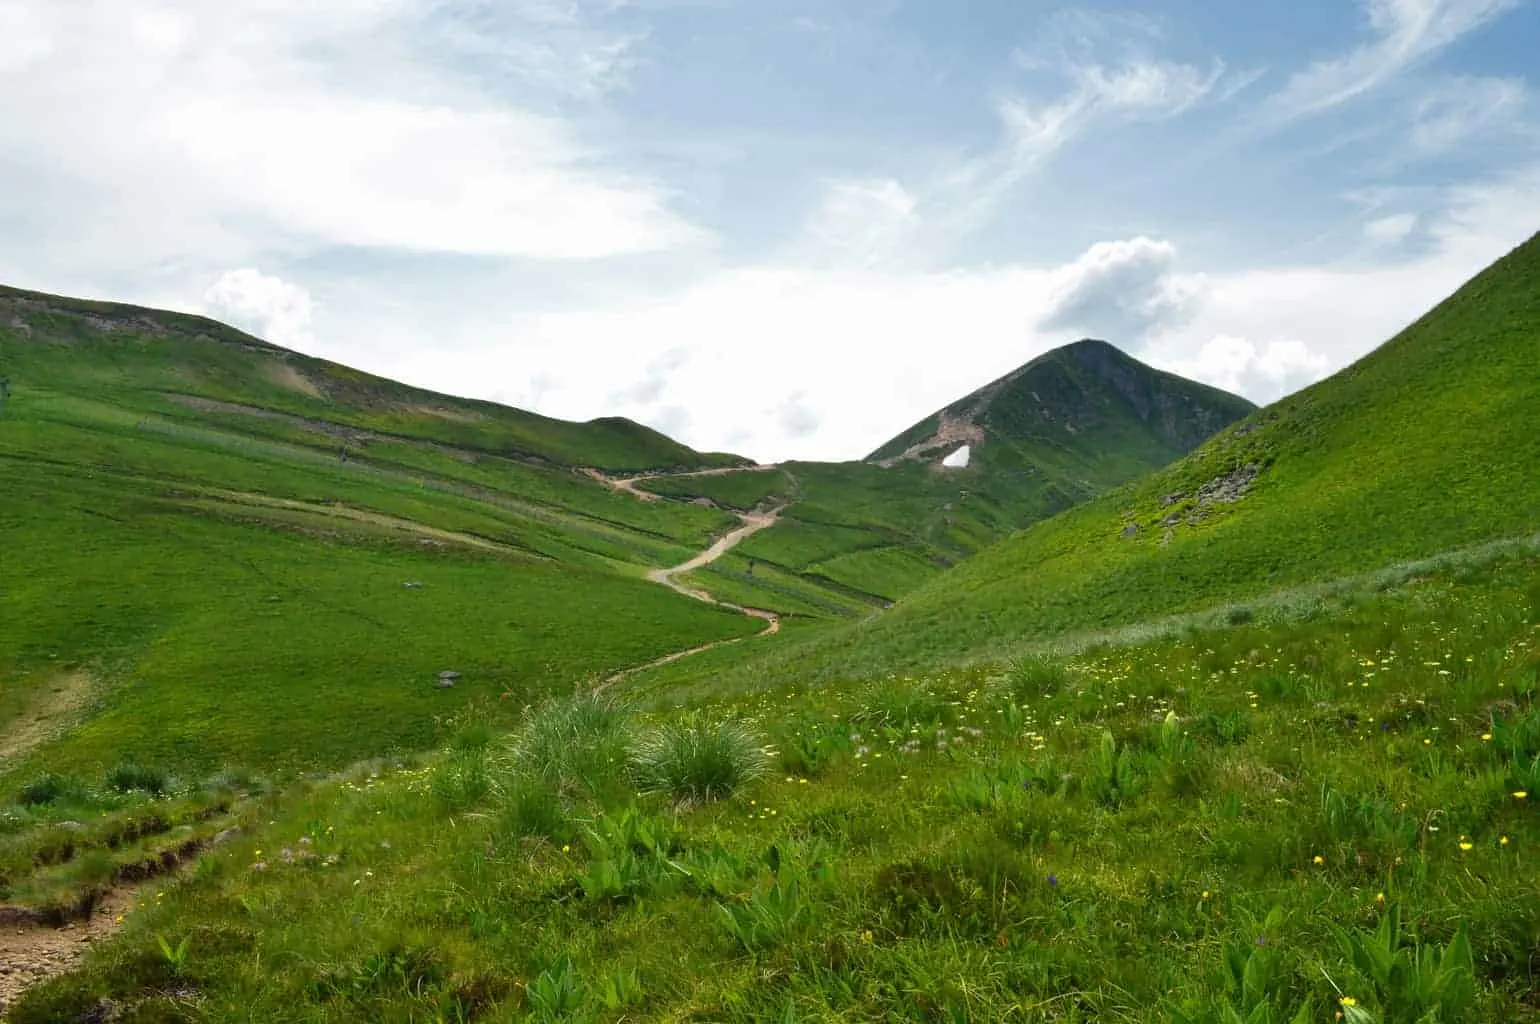 The Massif de Sancy is one of the best hiking trails in Auvergne, France.